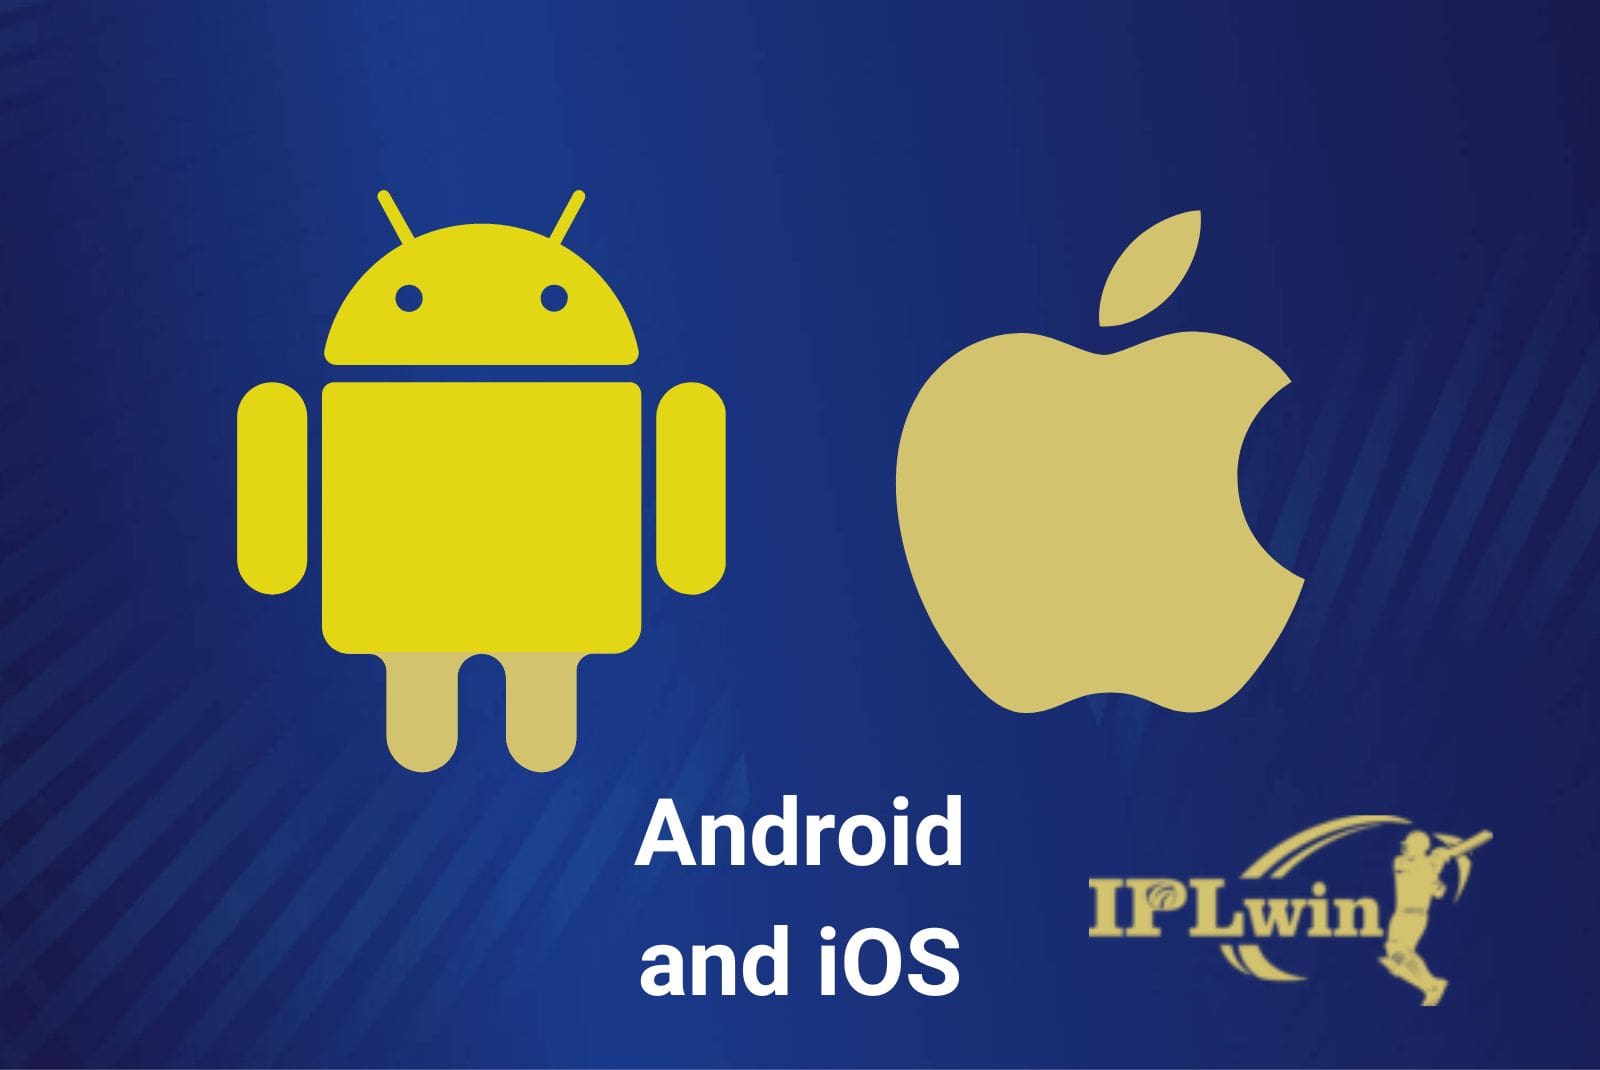 IPLwin official betting and gambling app for Android and iOS devices